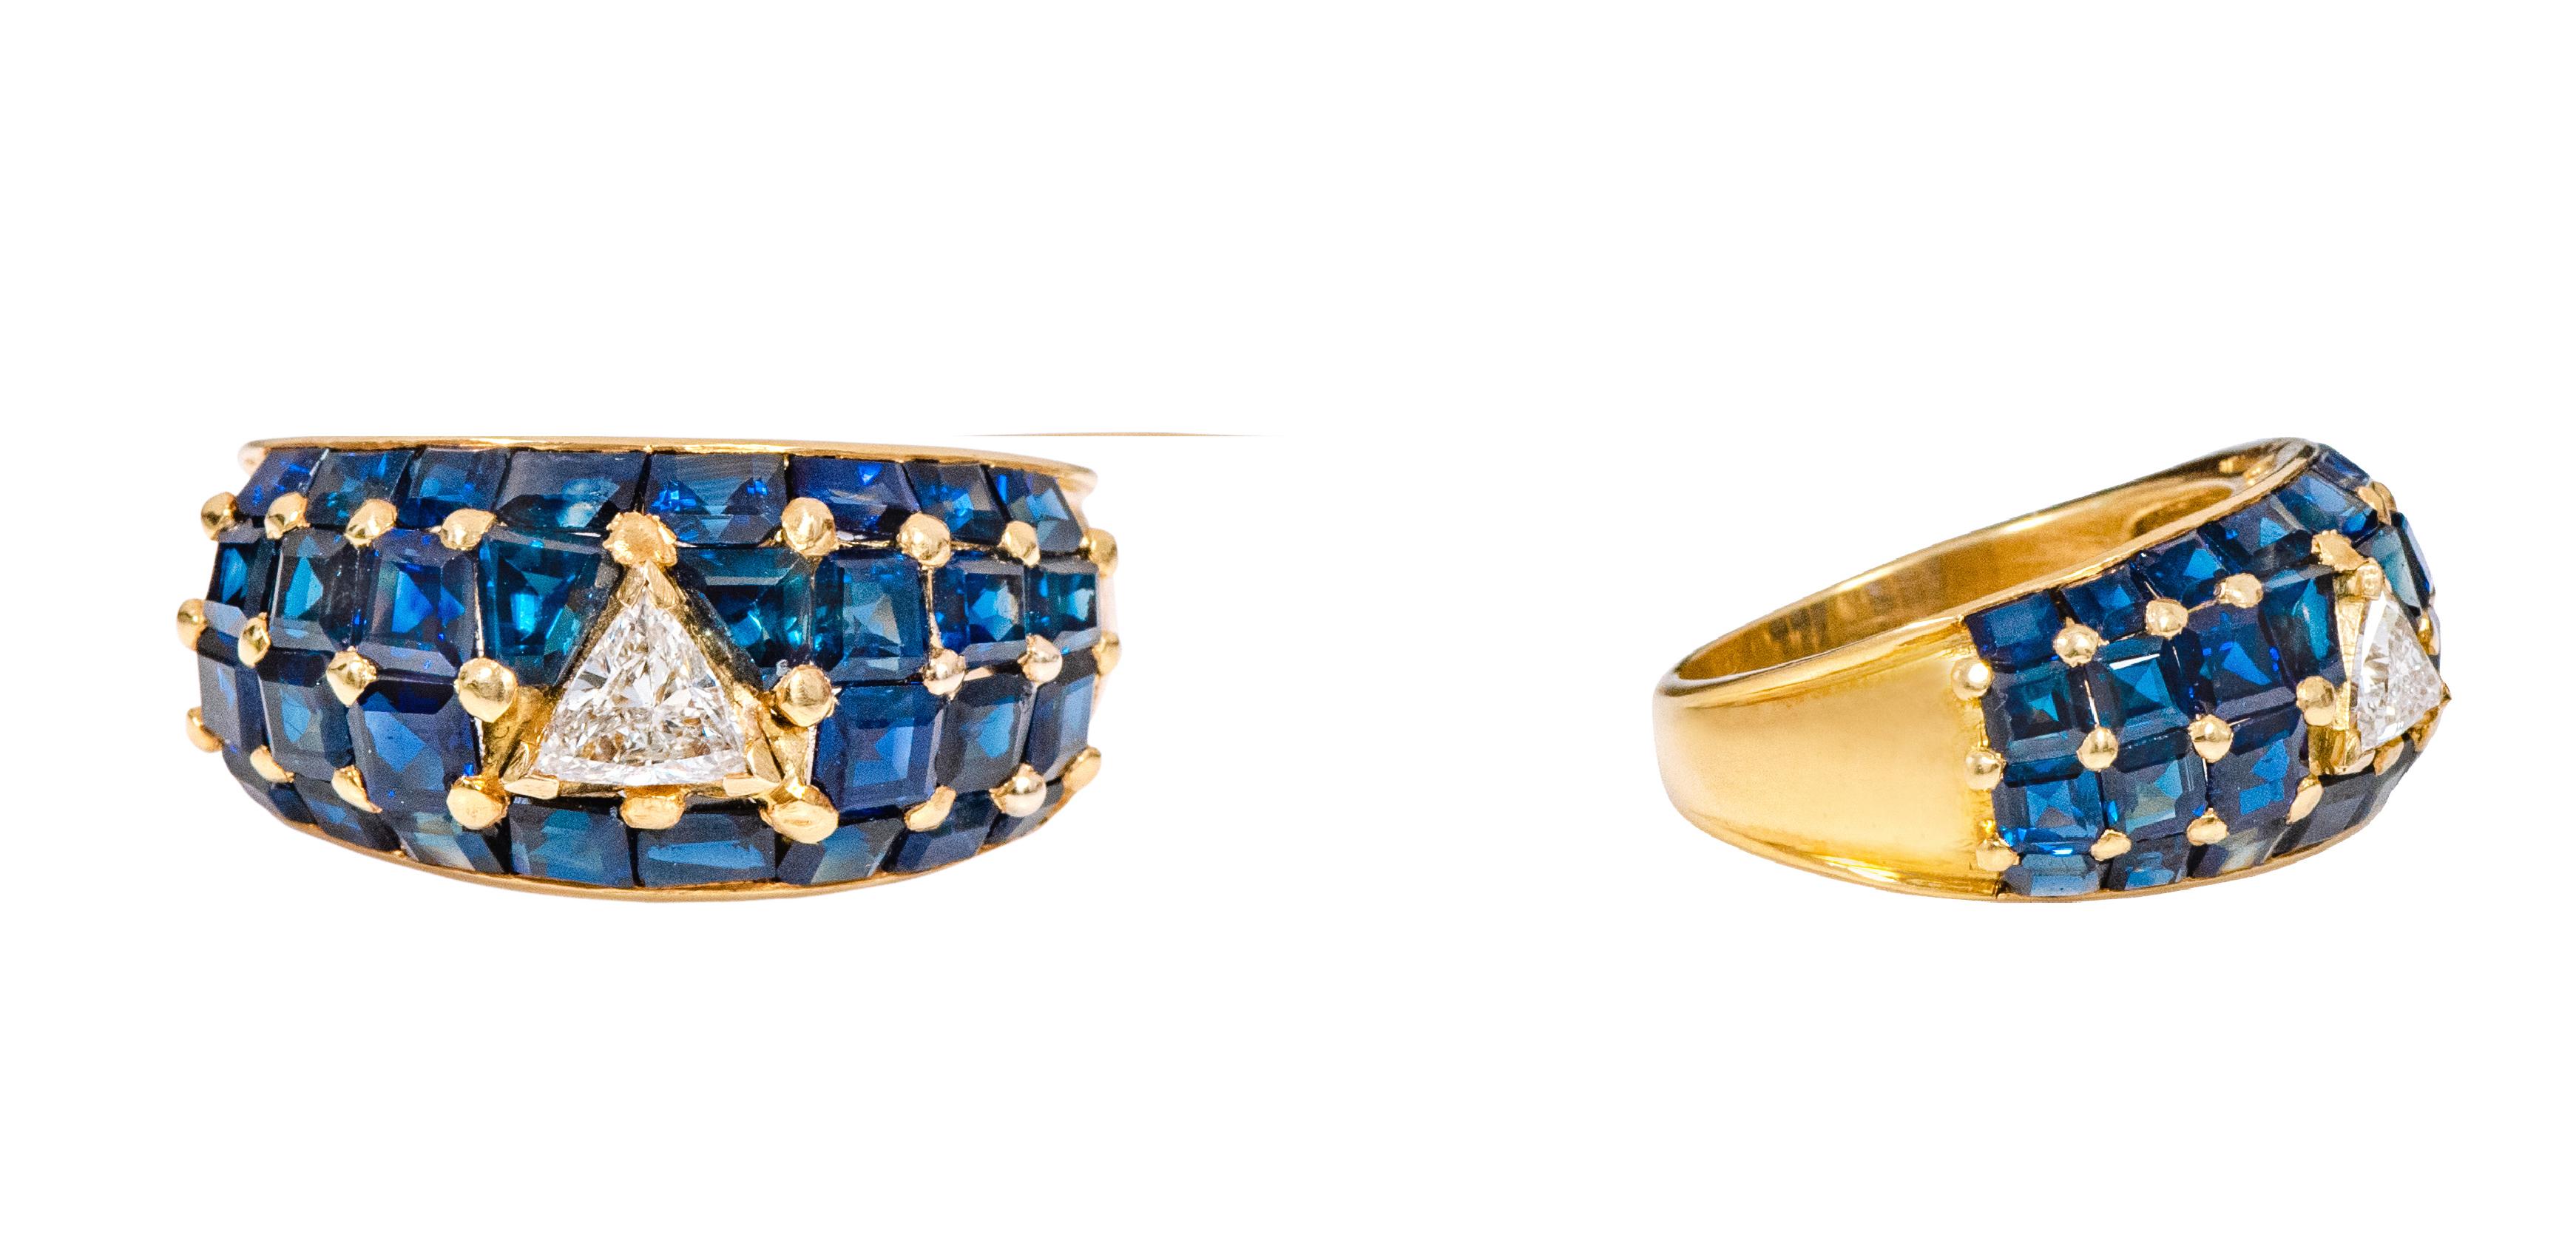 18 Karat Yellow Gold 6.20 Carat Diamond and Sapphire Statement Ring

This extraordinary royal blue sapphire and diamond broad band is glorious. The solitaire trillion shaped diamond in the center in V-prong setting is heightened with slightly